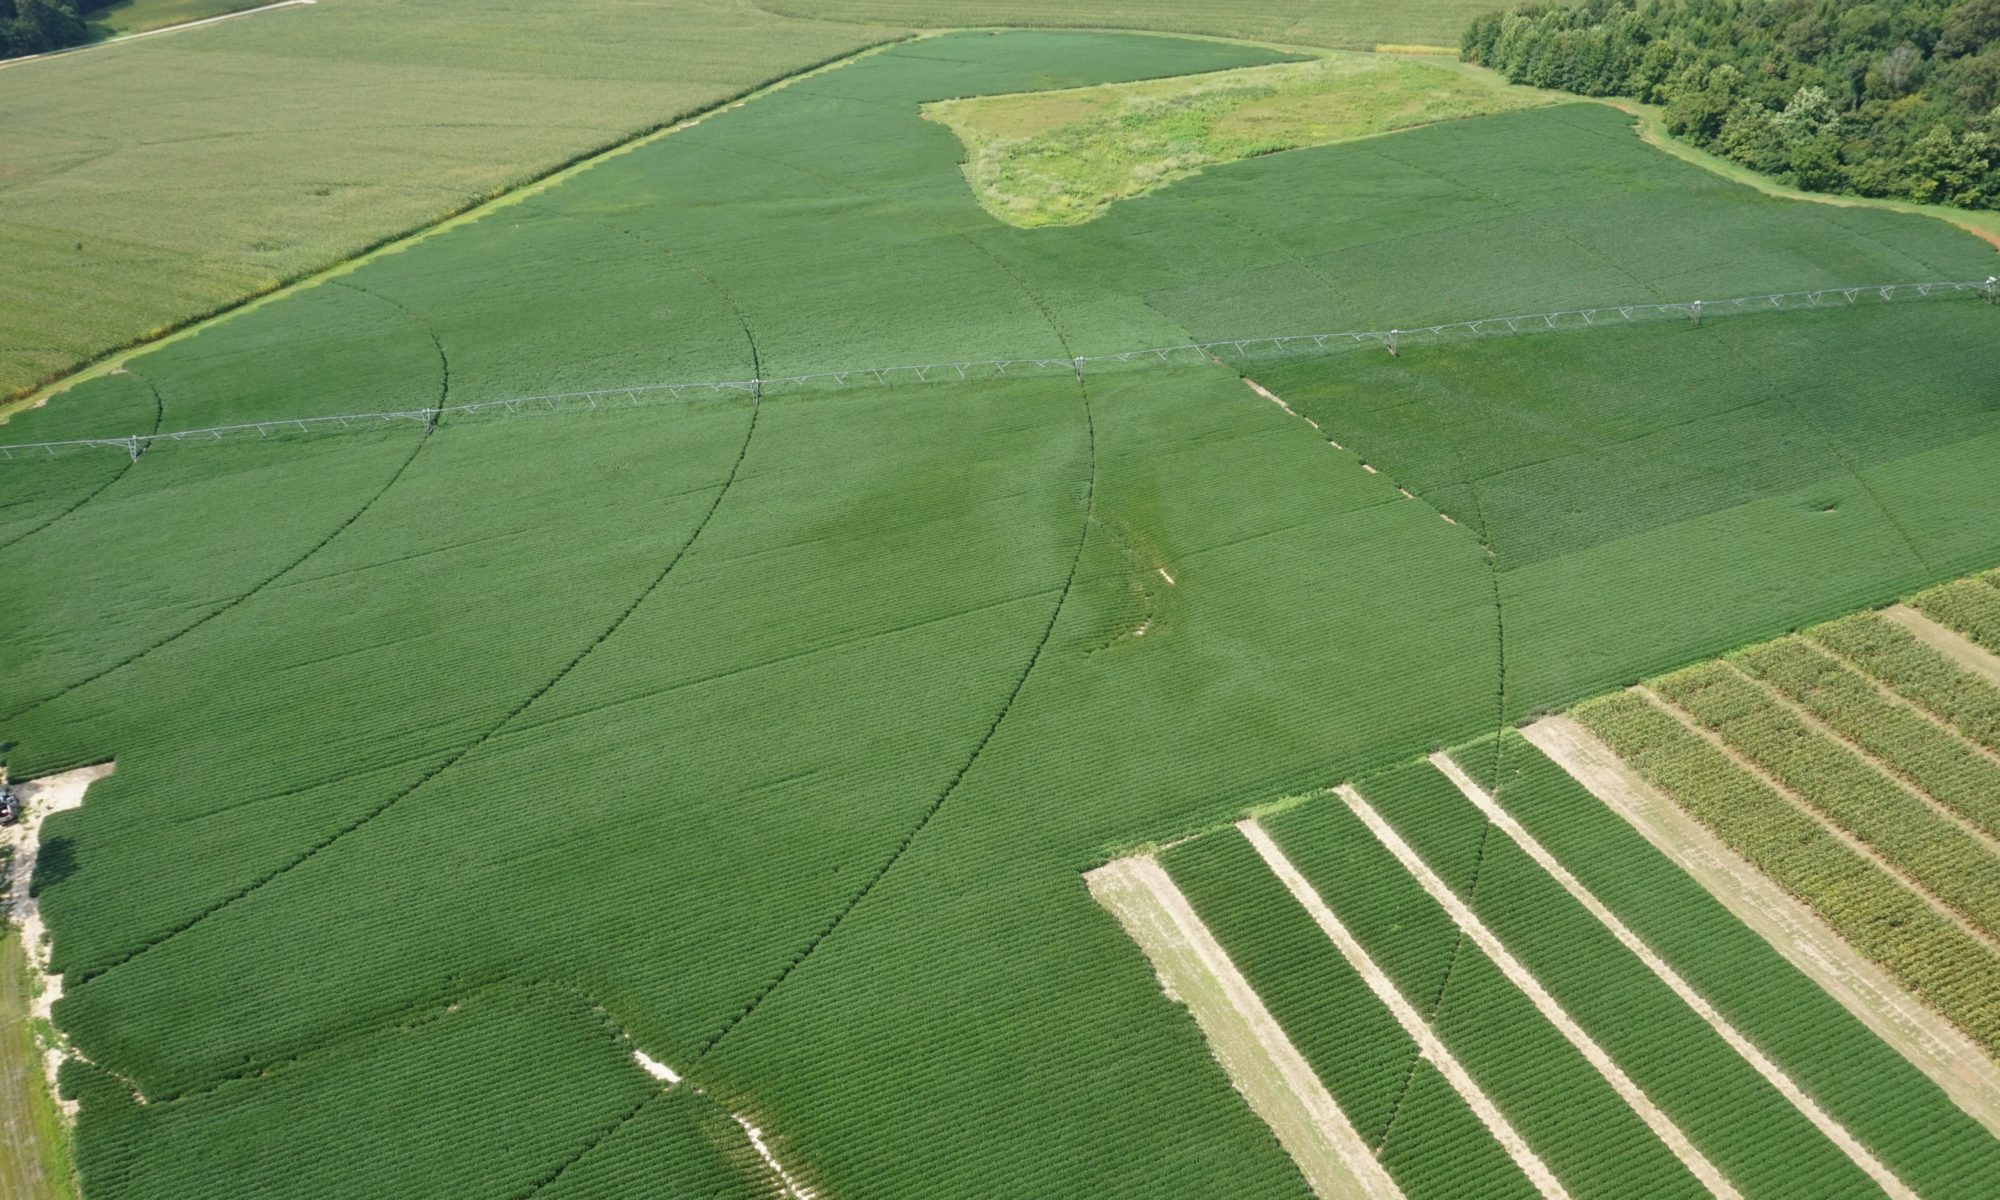 Aerial view of pasture equipped with irrigation system